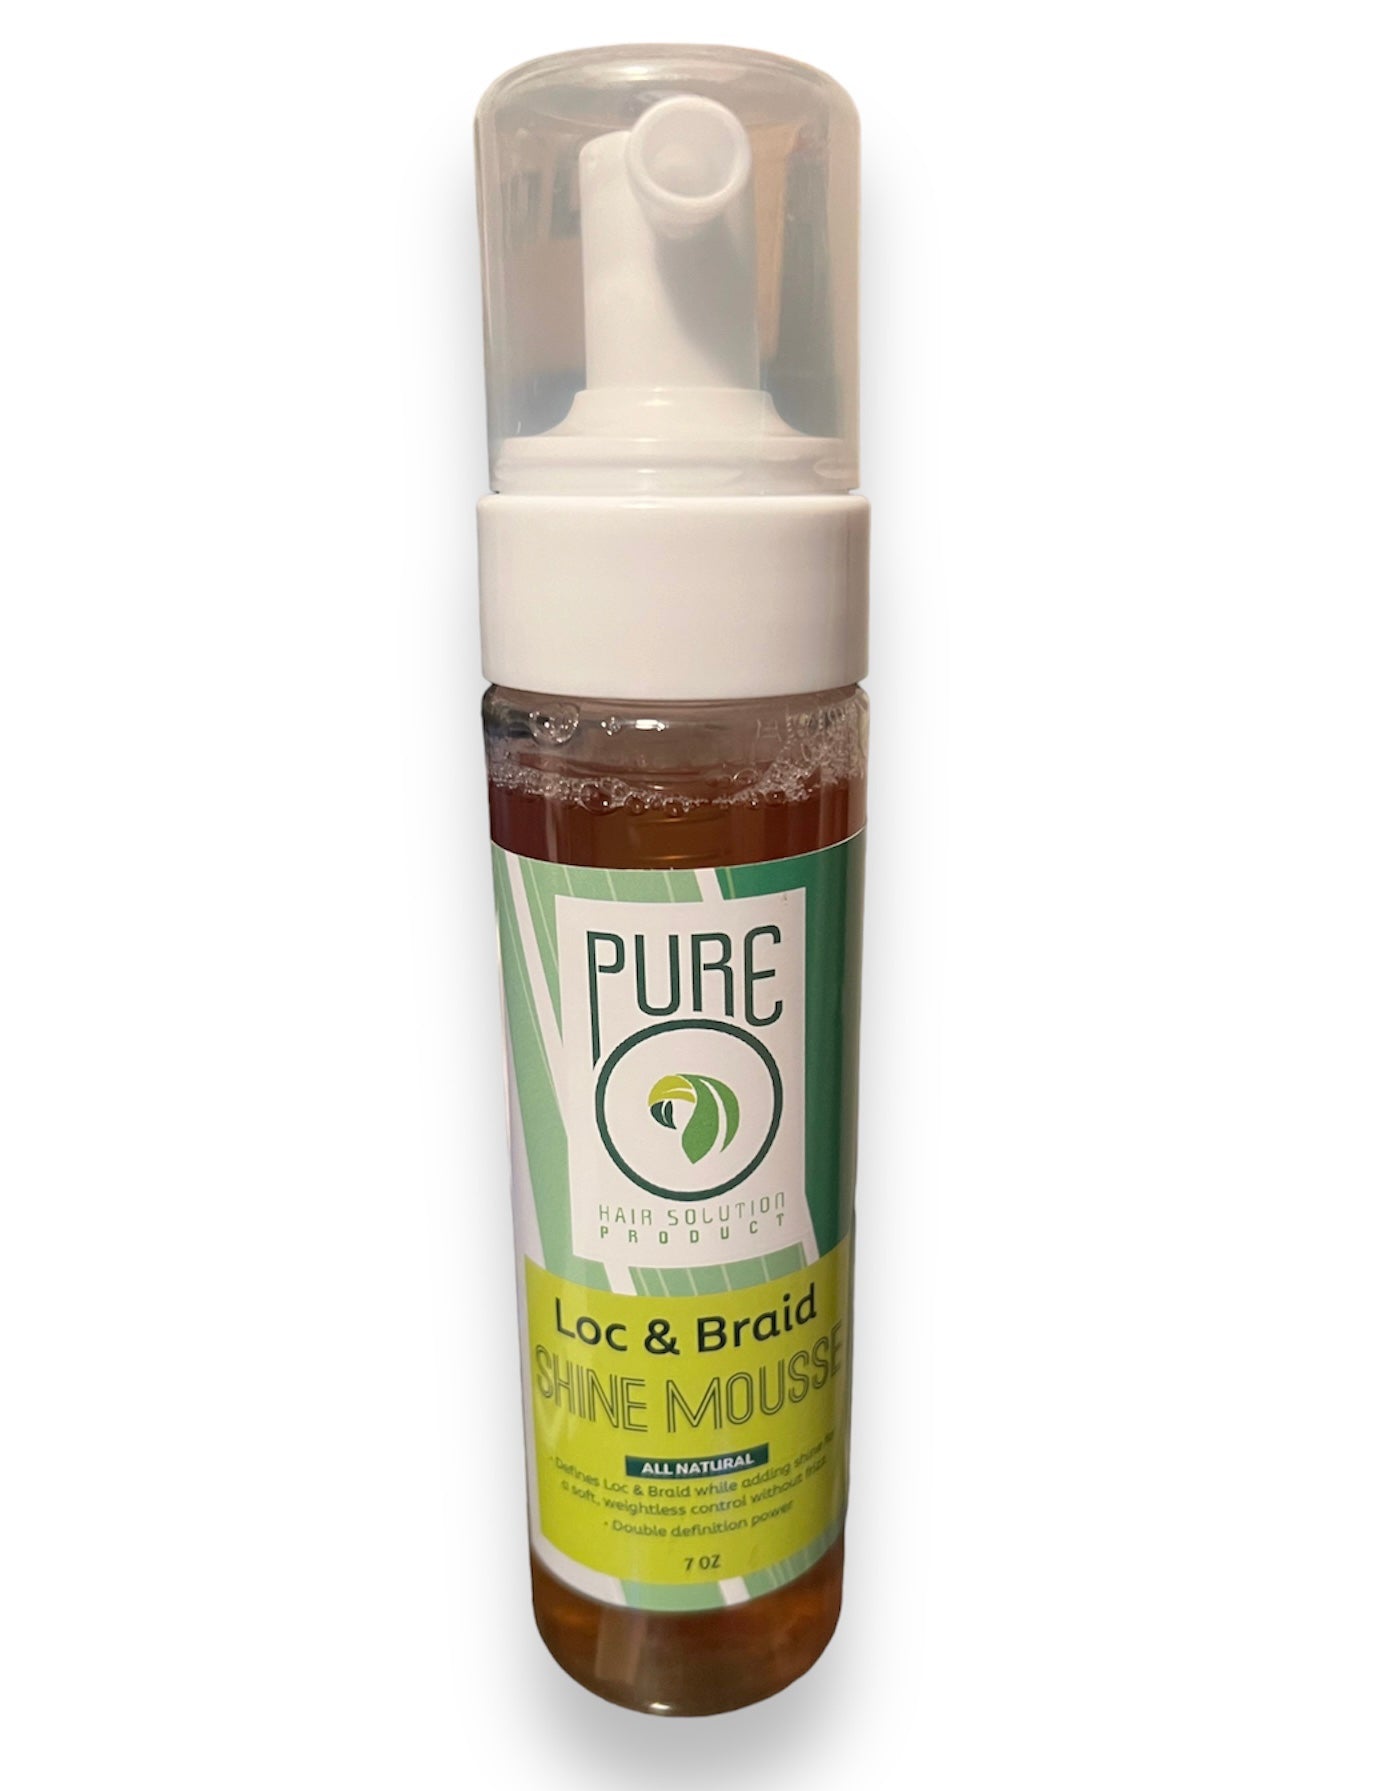 Hair Solution – PureO Natural Products